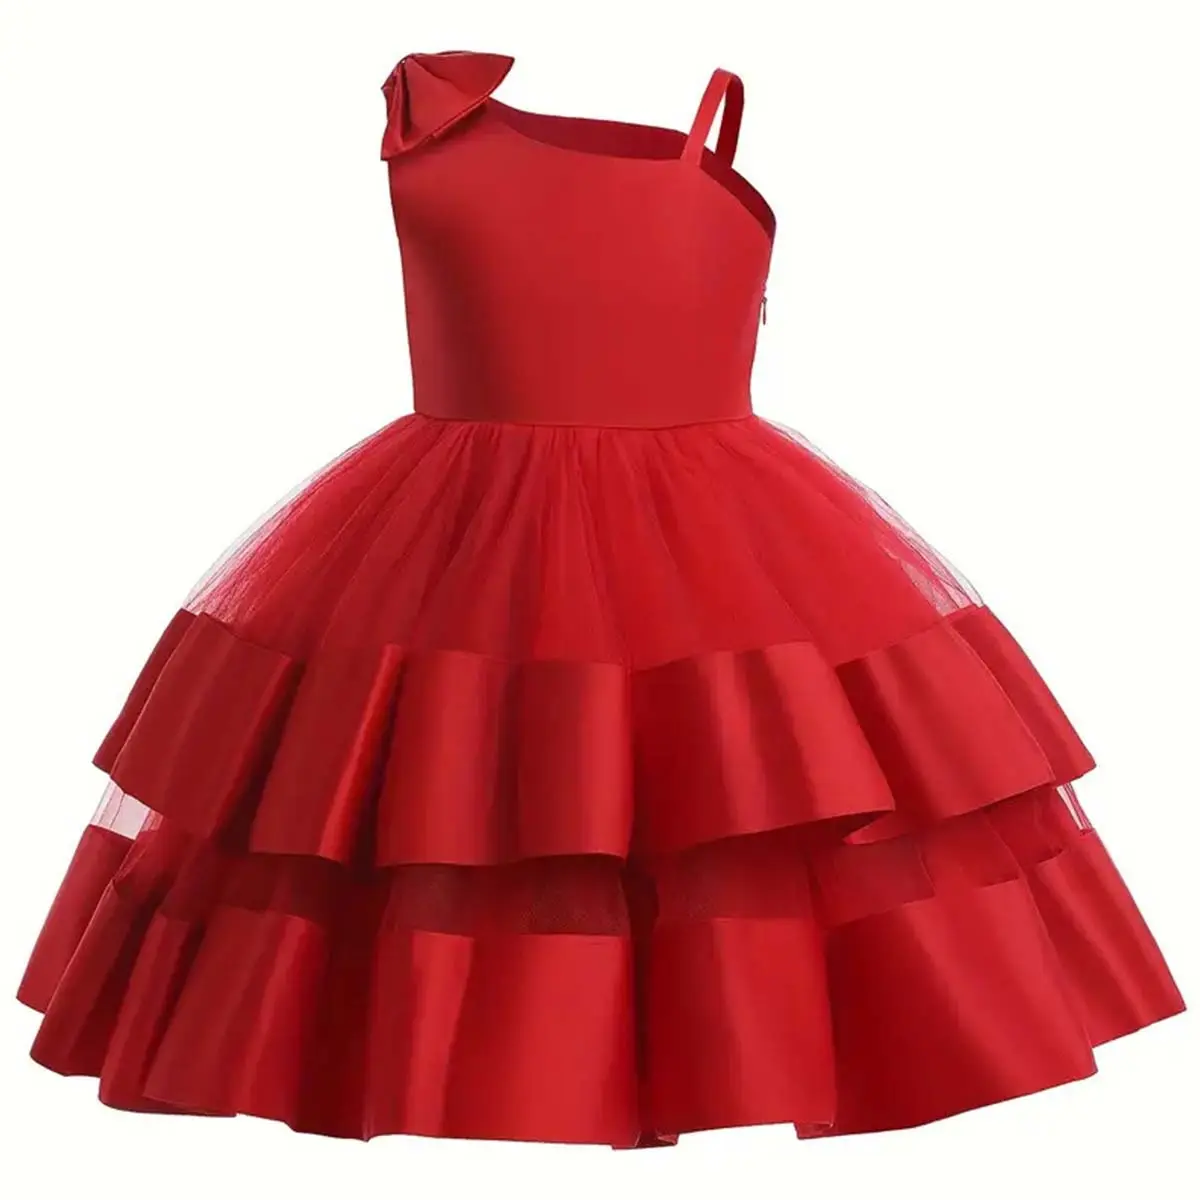 Birthday Baby Dress Little Girls Princess Dresses Christmas Wear Pompadour bow dress Children's Baby Gown clothing